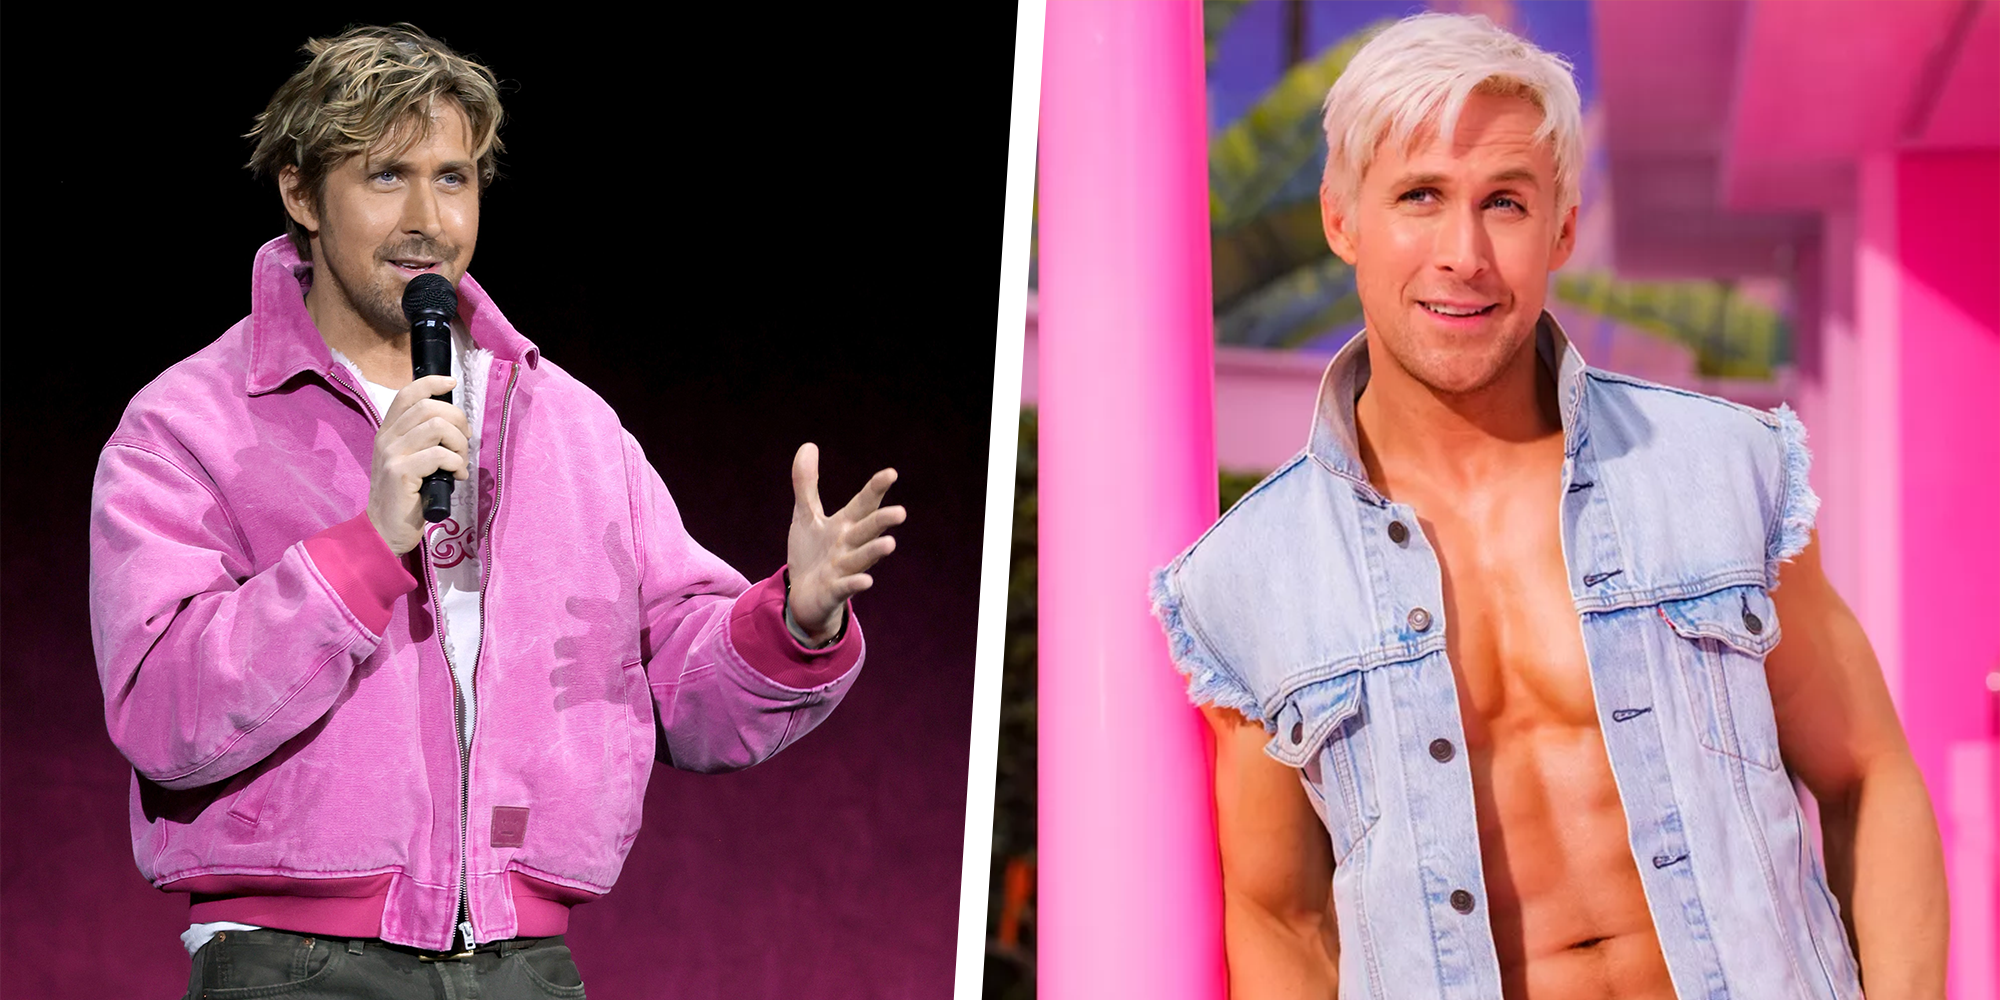 Ryan Gosling's Ken Has an Existential Crisis in New Clip From 'Barbie